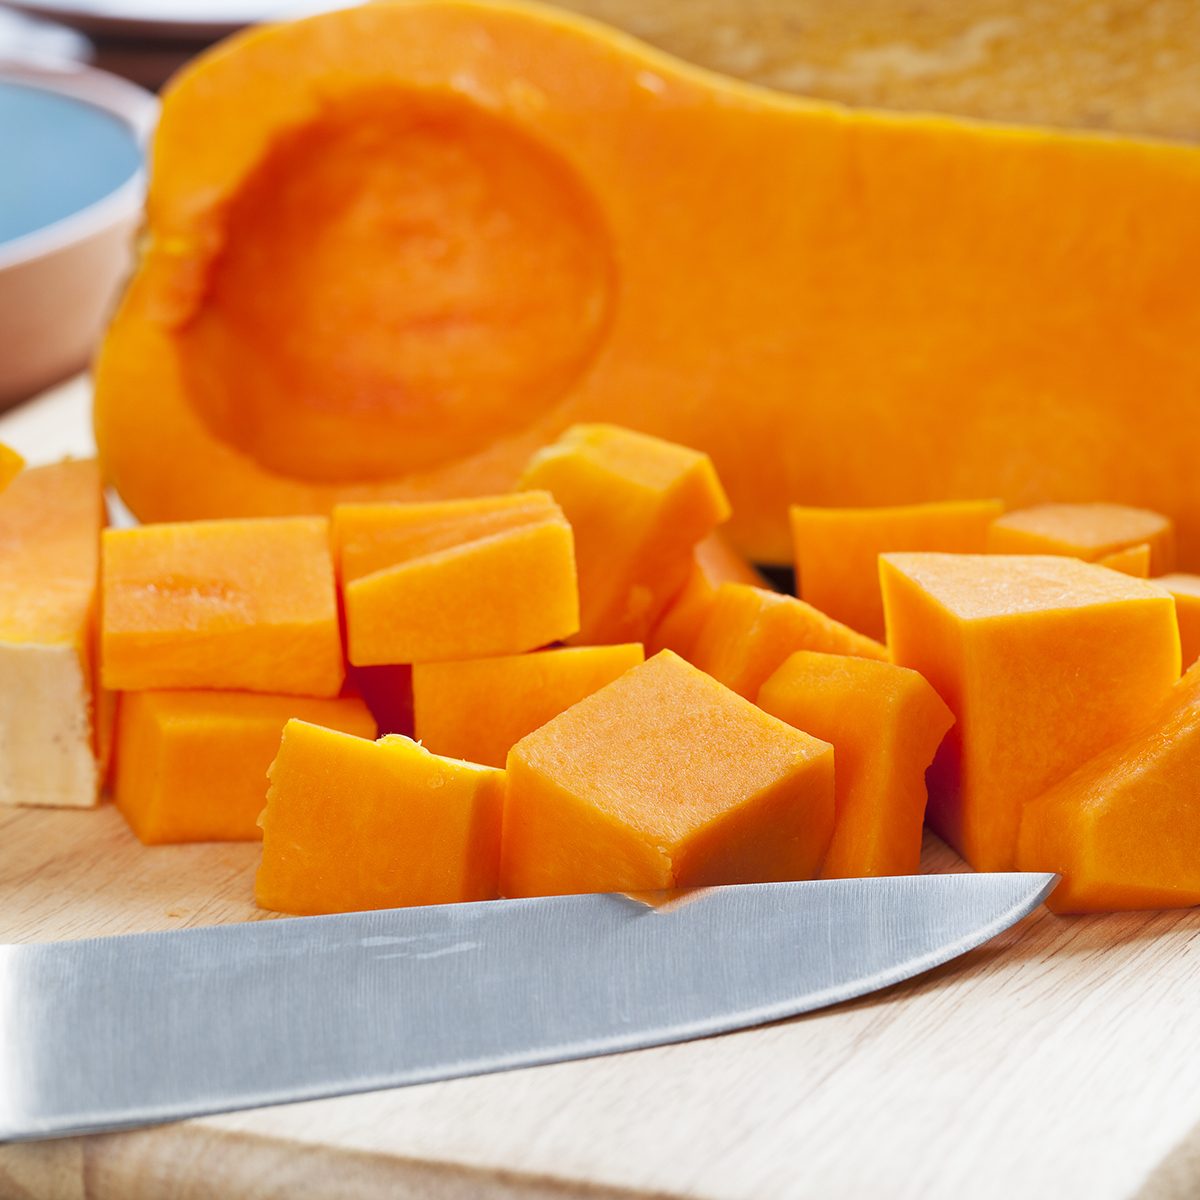 Butternut squash, cut into cubes and ready for cooking